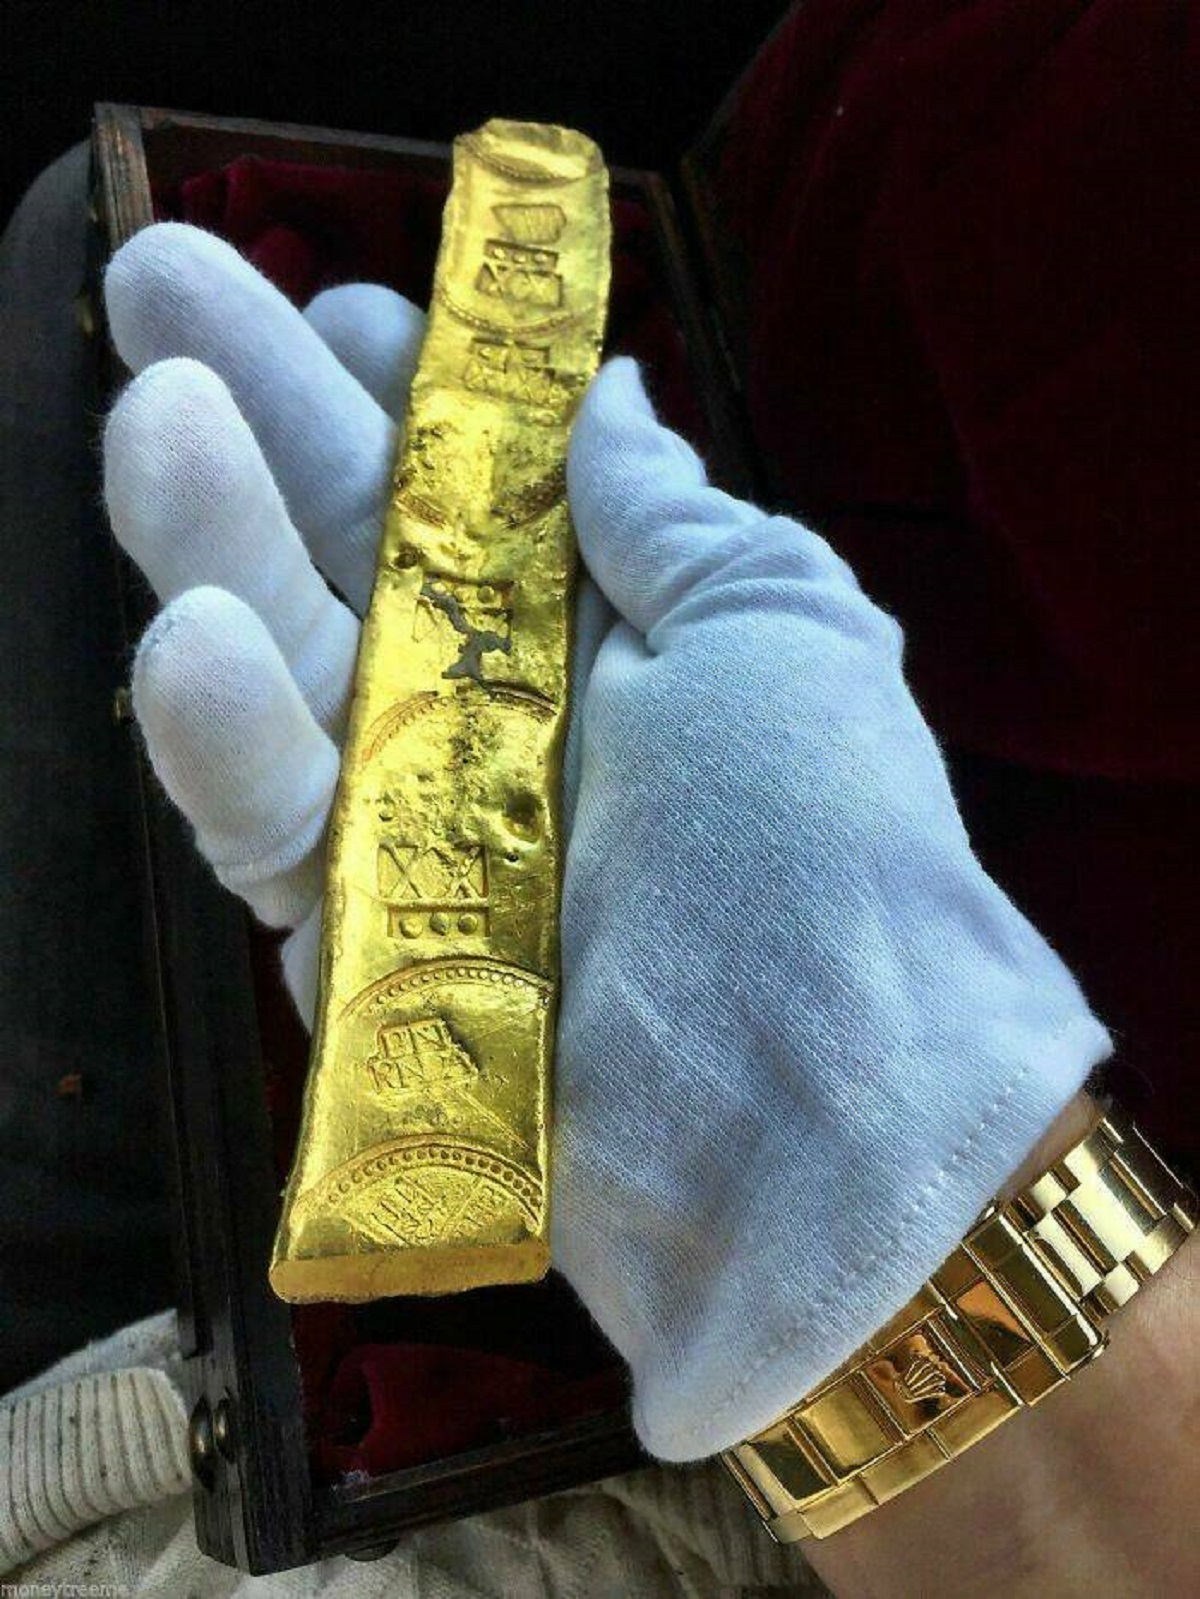 "A Gold Bar With Mint Marks, Recovered From The Spanish Treasure Ship "Atocha" Which Sank In 1622"